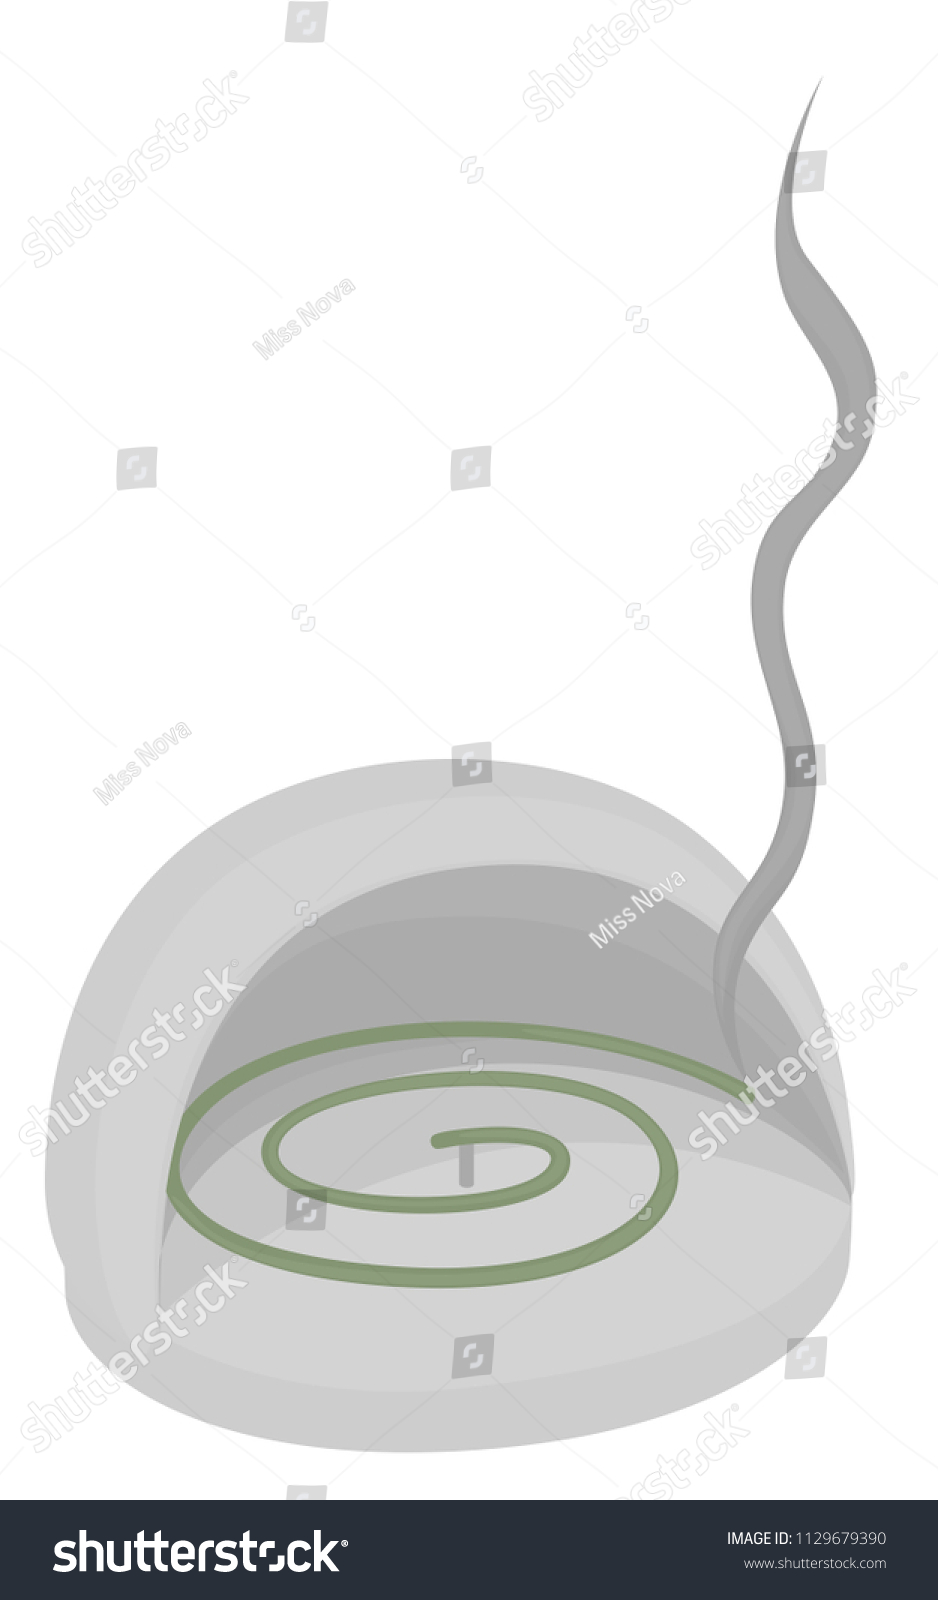 SVG of Mosquito coil in a holder vector art.  there is a little wisp of smoke trailing upward.  Background is transparent in vector file and white in jpeg file. svg